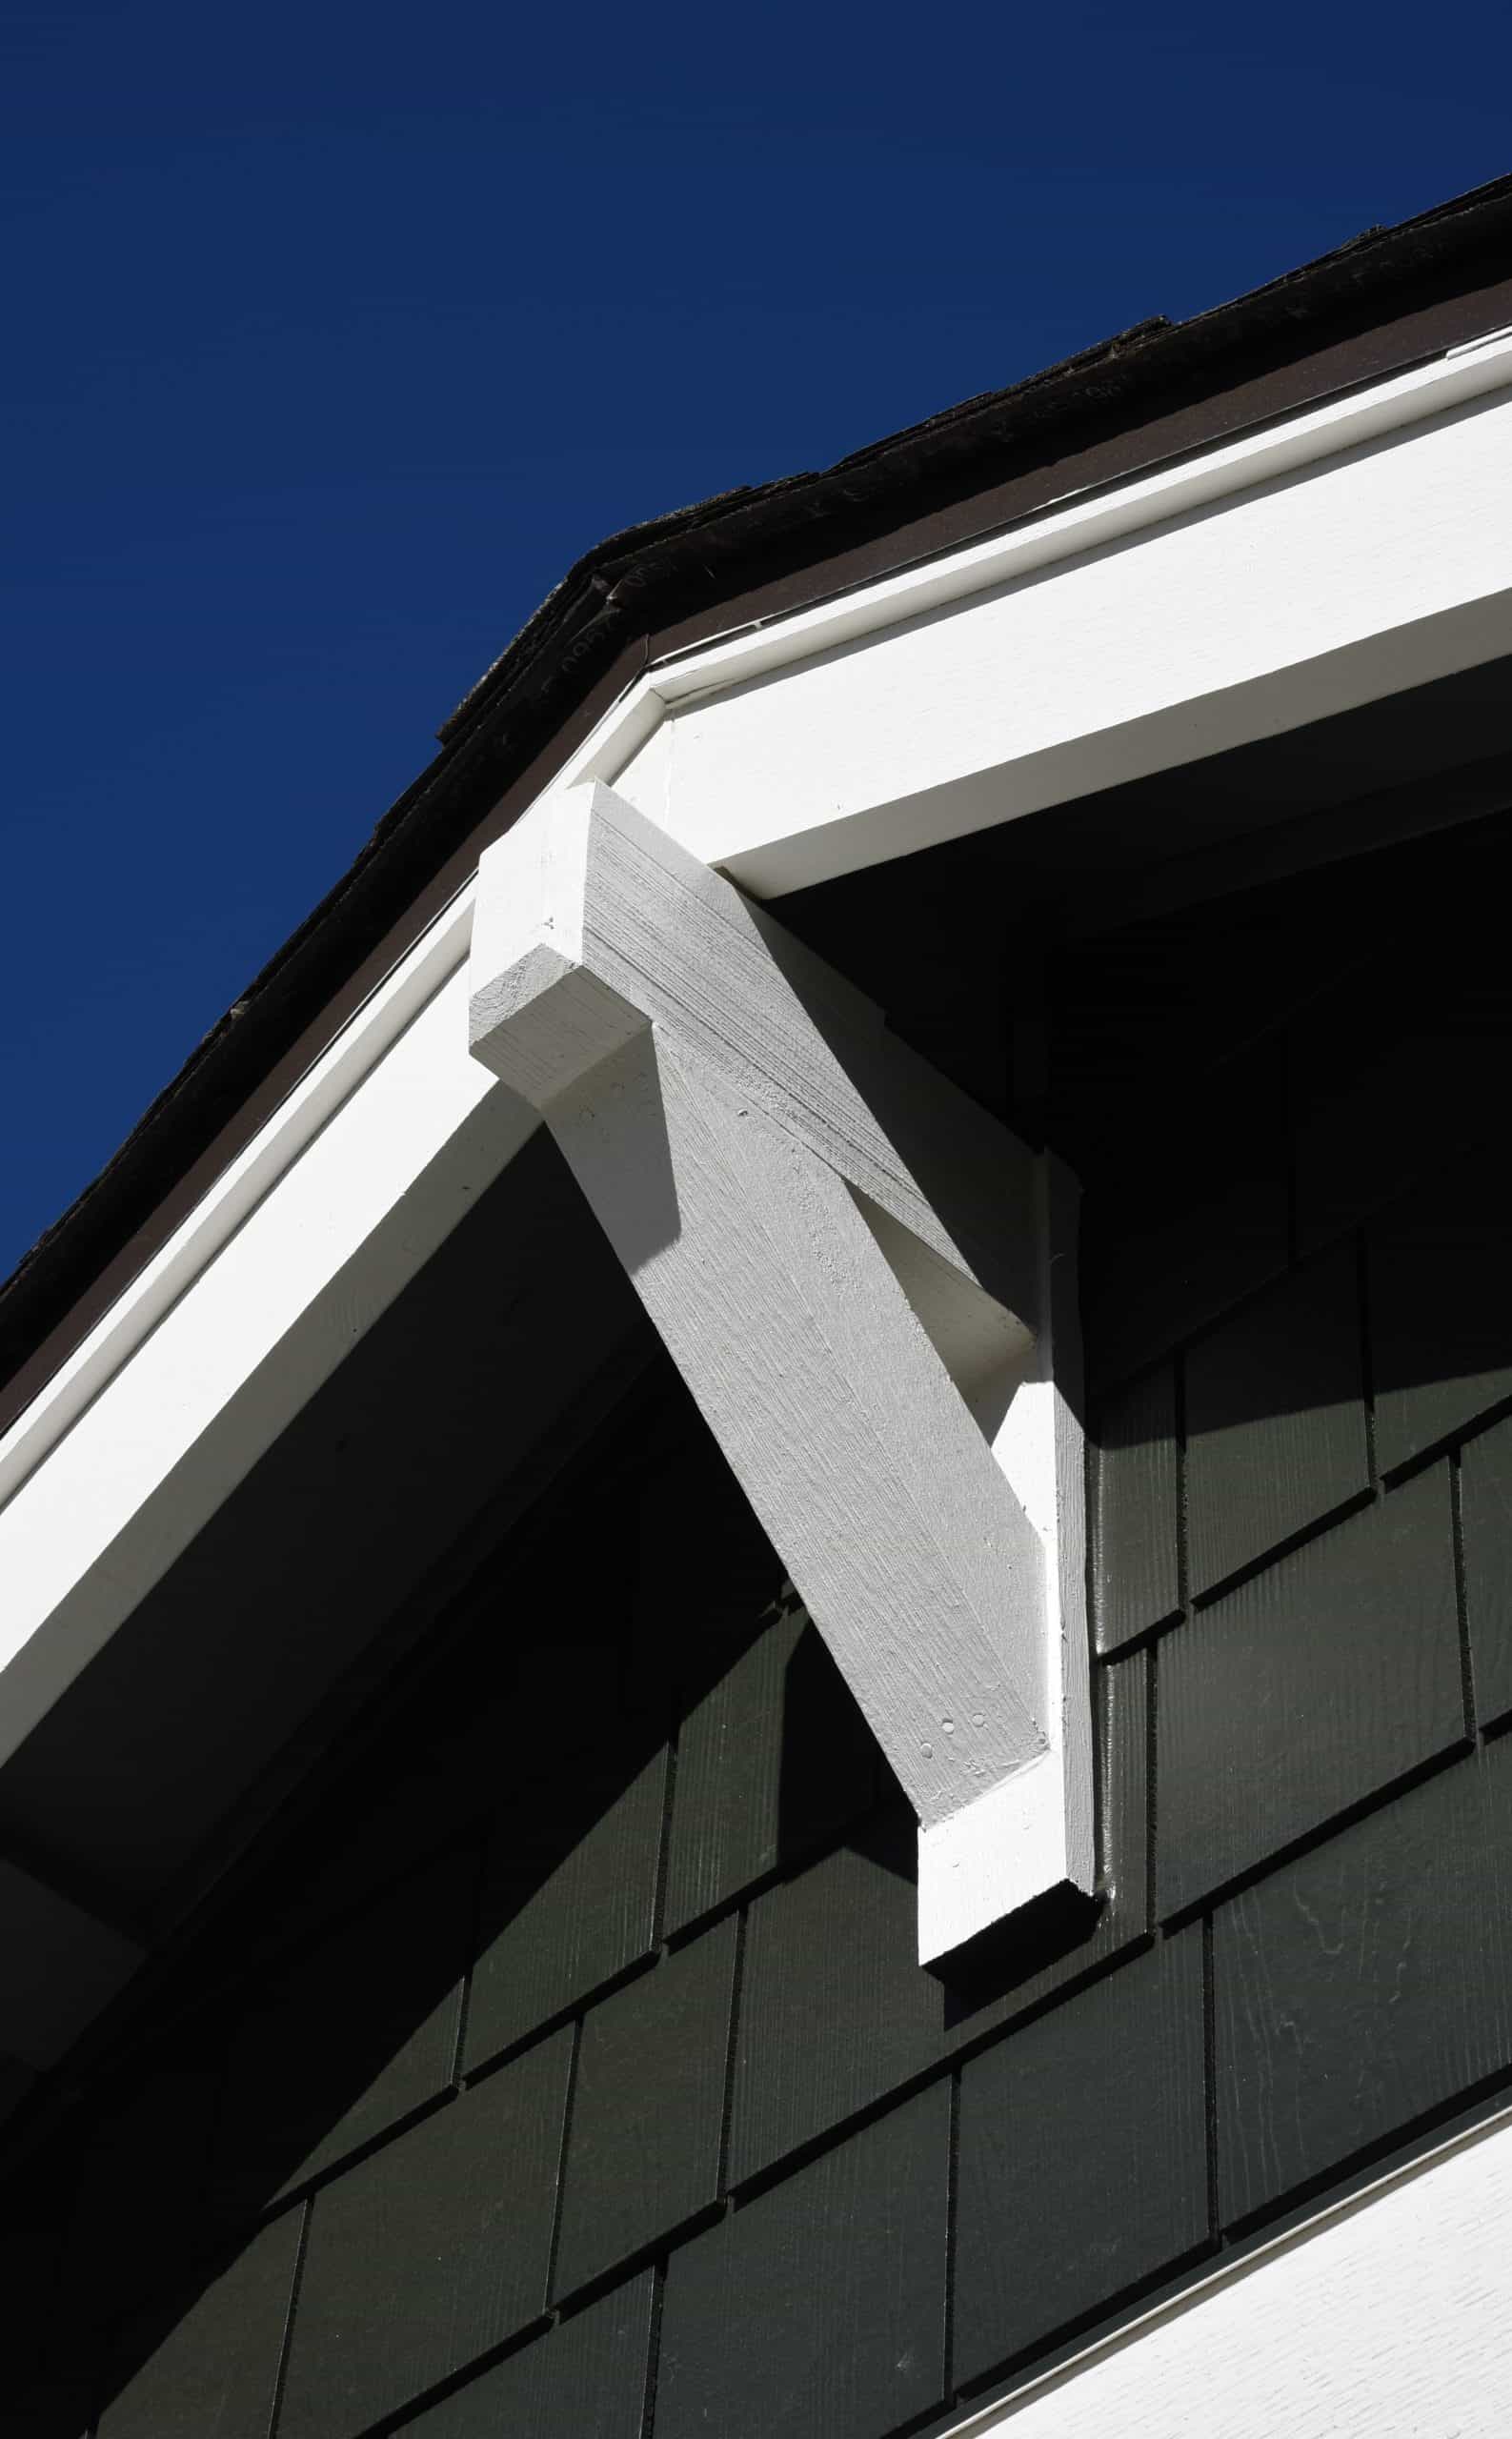 Eaves and Rakes - Why Are They Important?